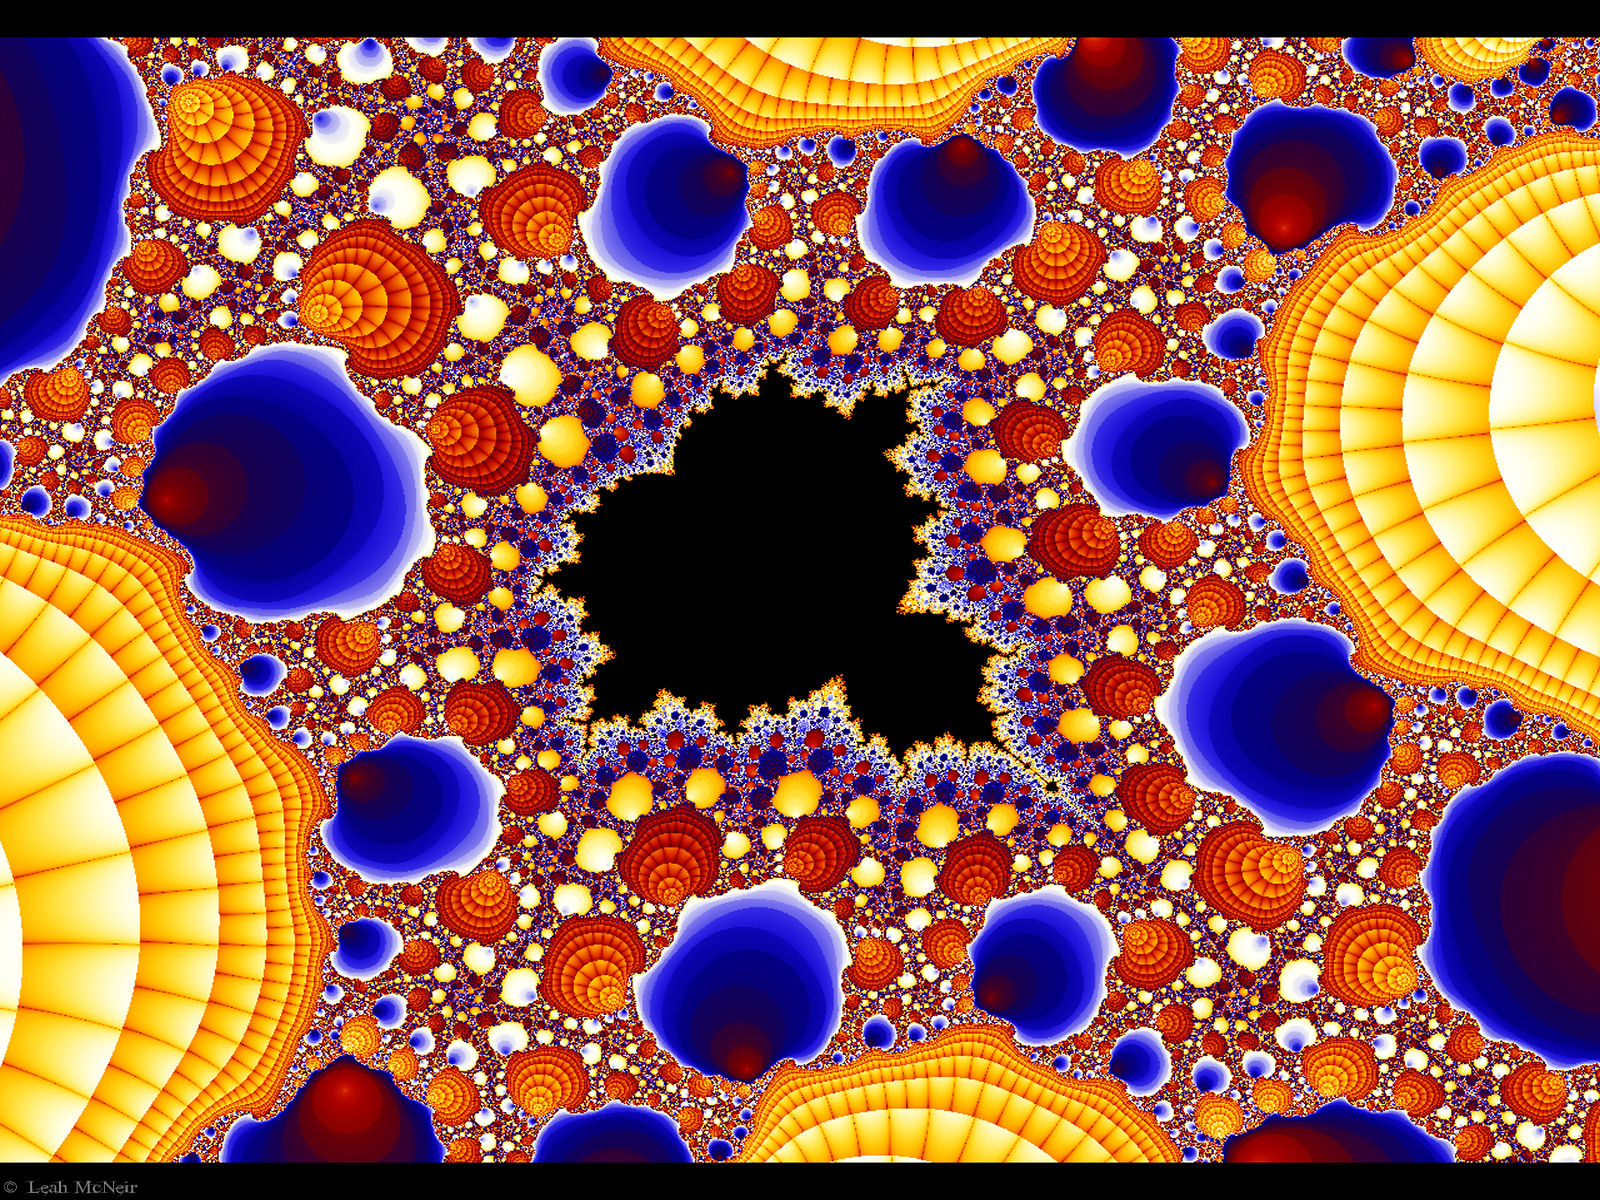 More Abstract Fractal Wallpaper Background Celestial Dreams